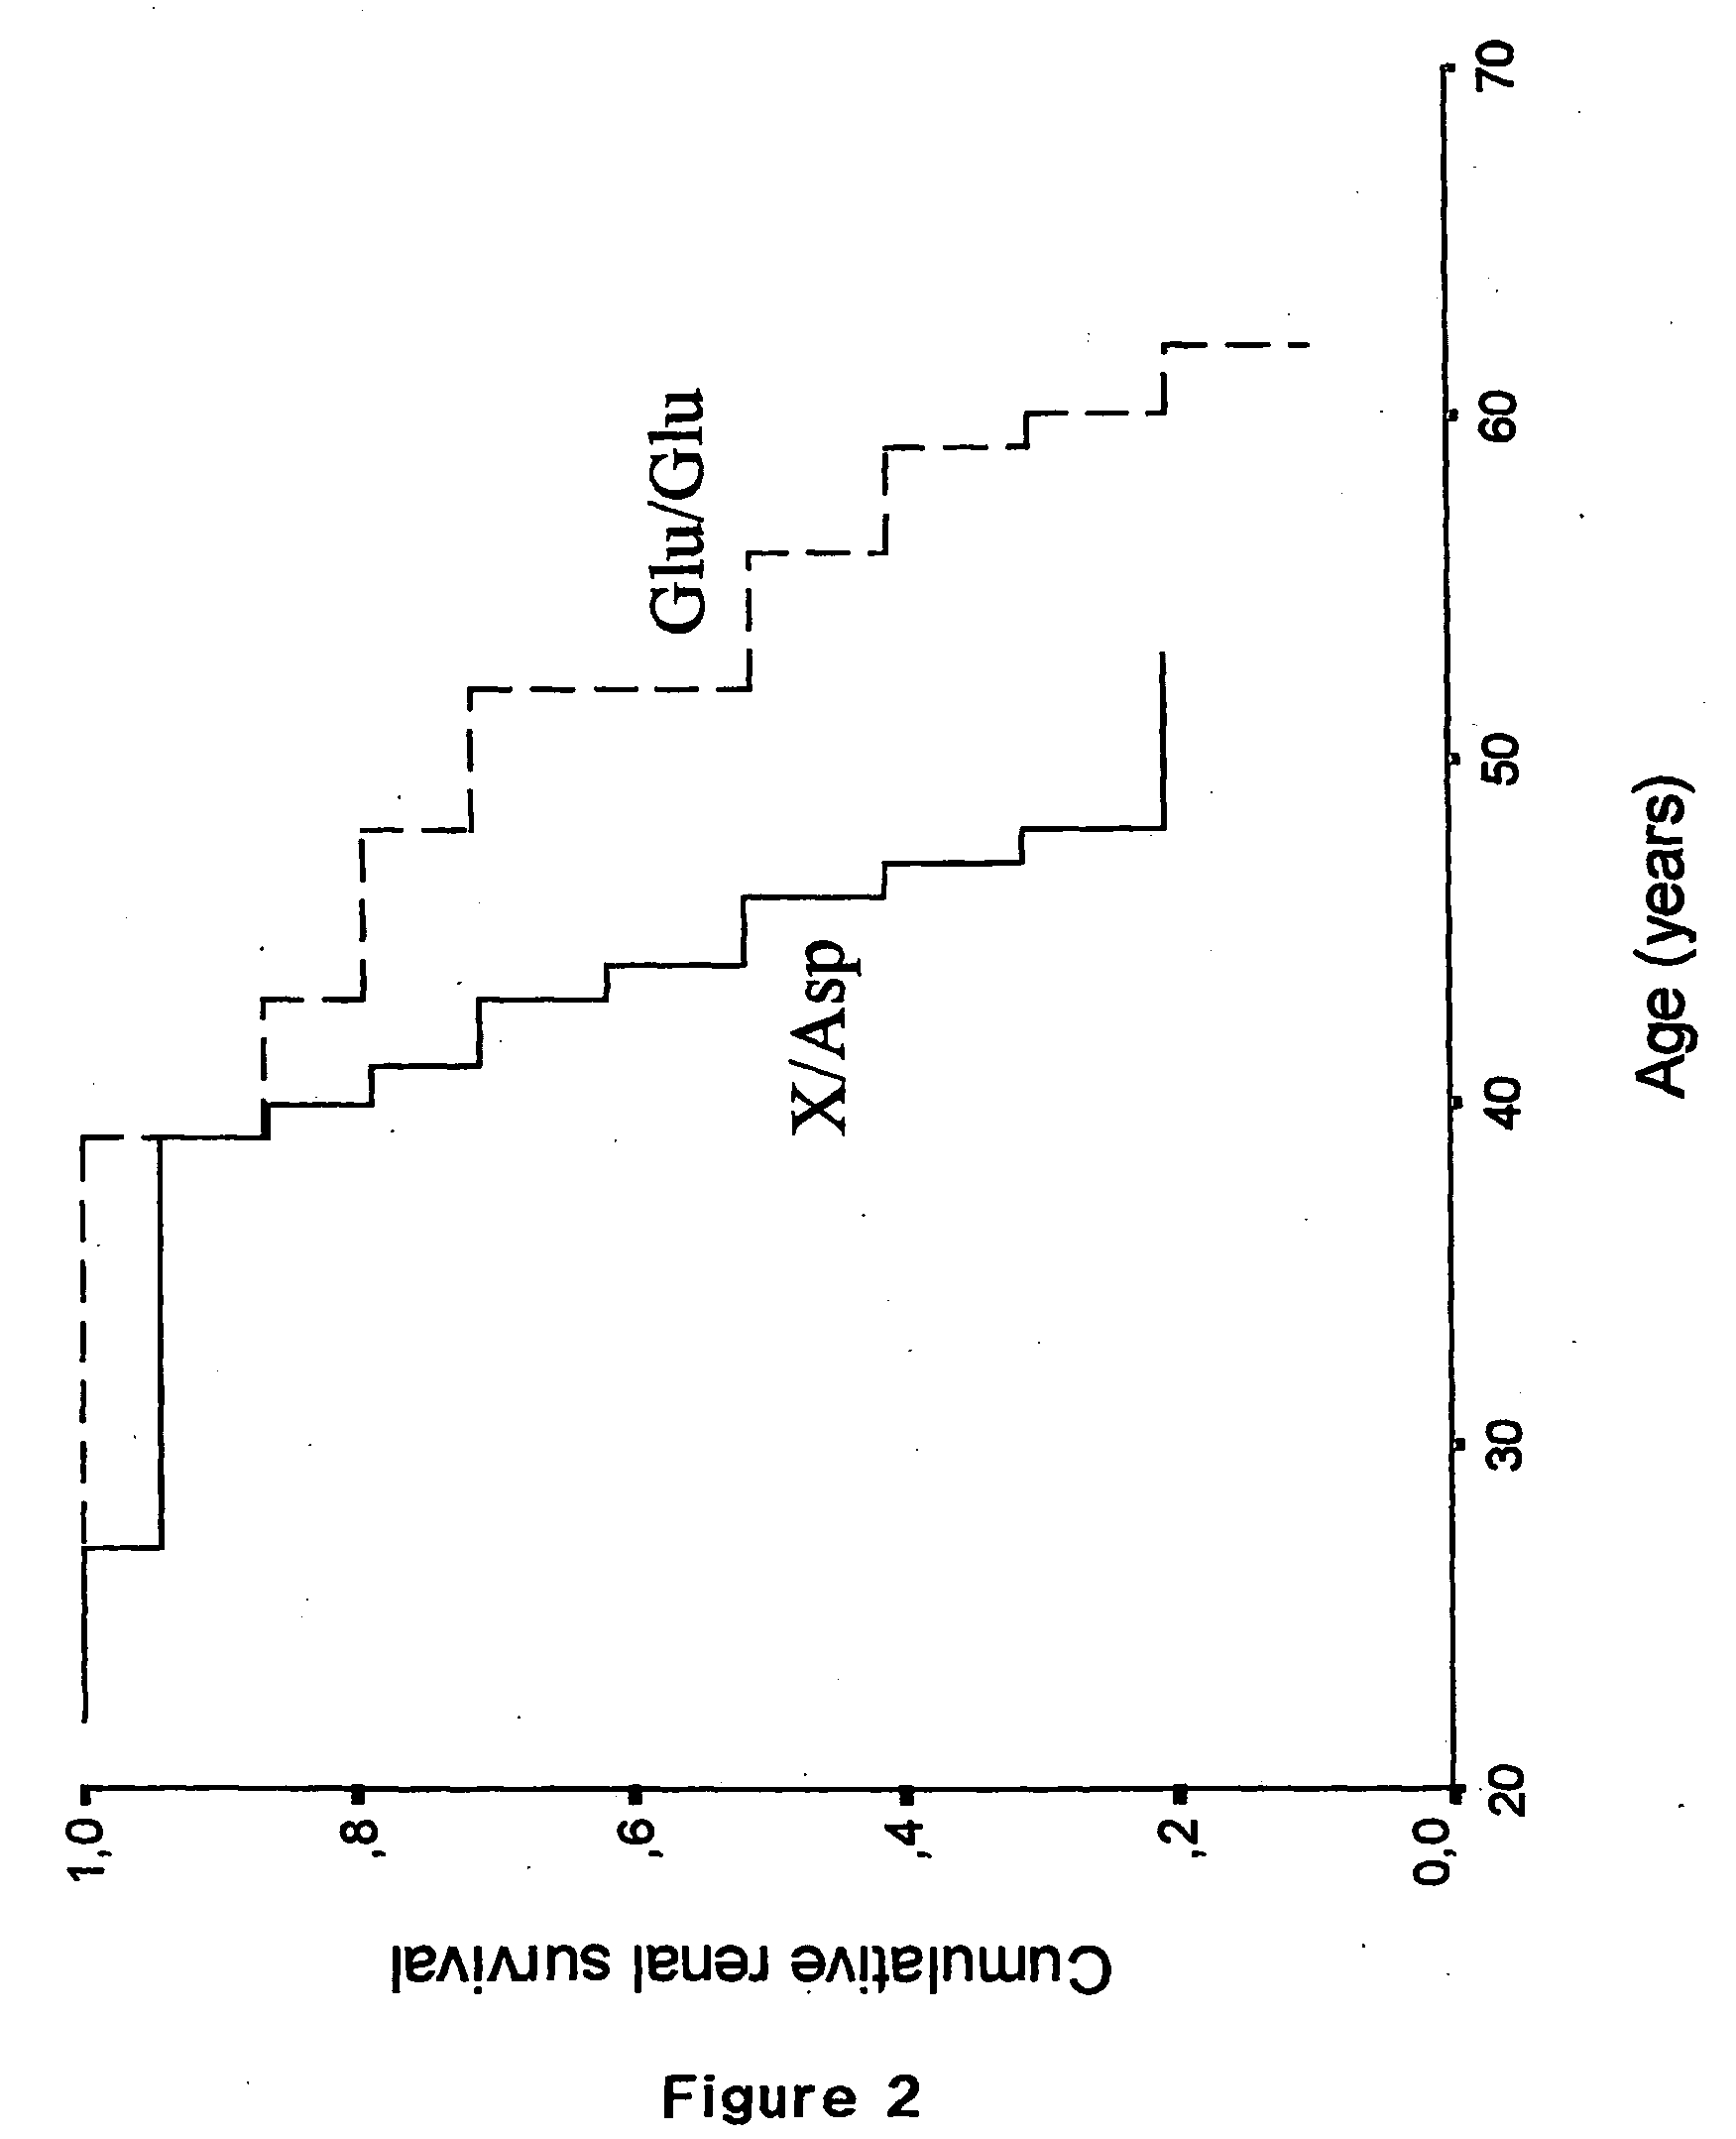 Method for diagnosing and treating predisposition for accelerated autosomal dominant polycystic kidney disease